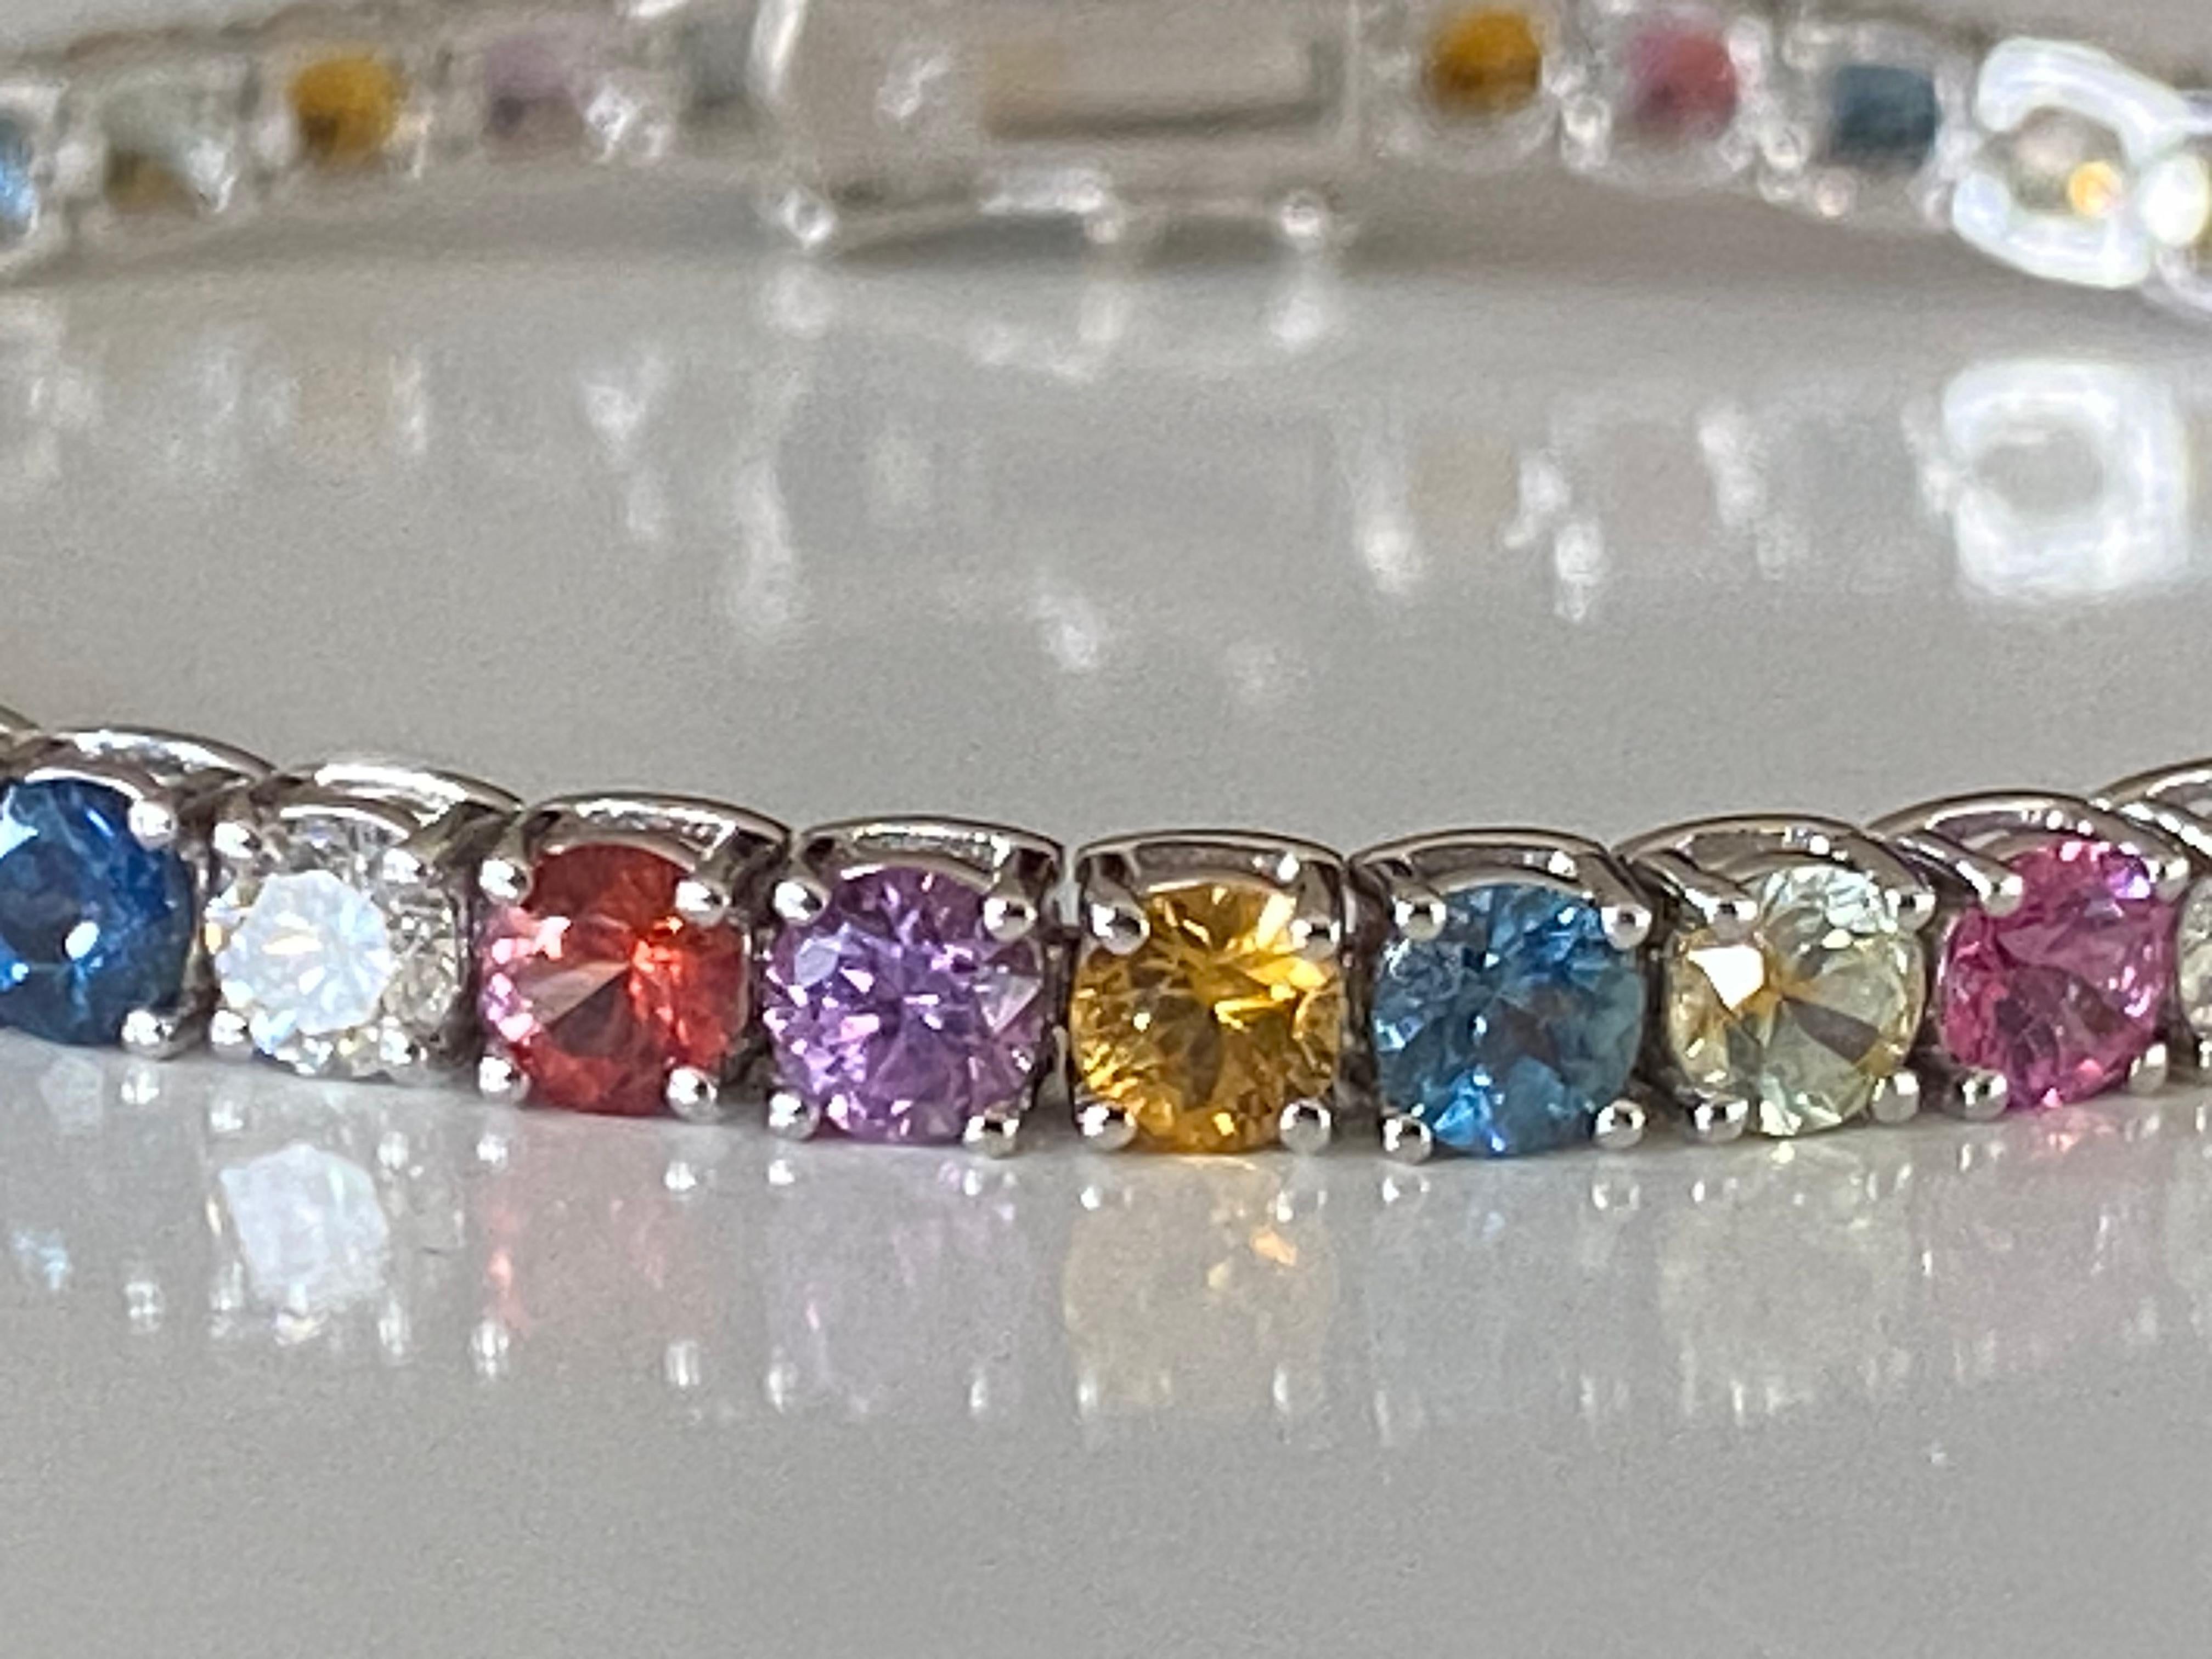 This exquisite tennis bracelet is set with 42 natural round multi-color sapphires mined in Montana totaling 9.67 carats interspersed with 9 natural round diamonds totaling 0.97 carats, G-H color, SI1 clarity. The bracelet is handcrafted in 18kt